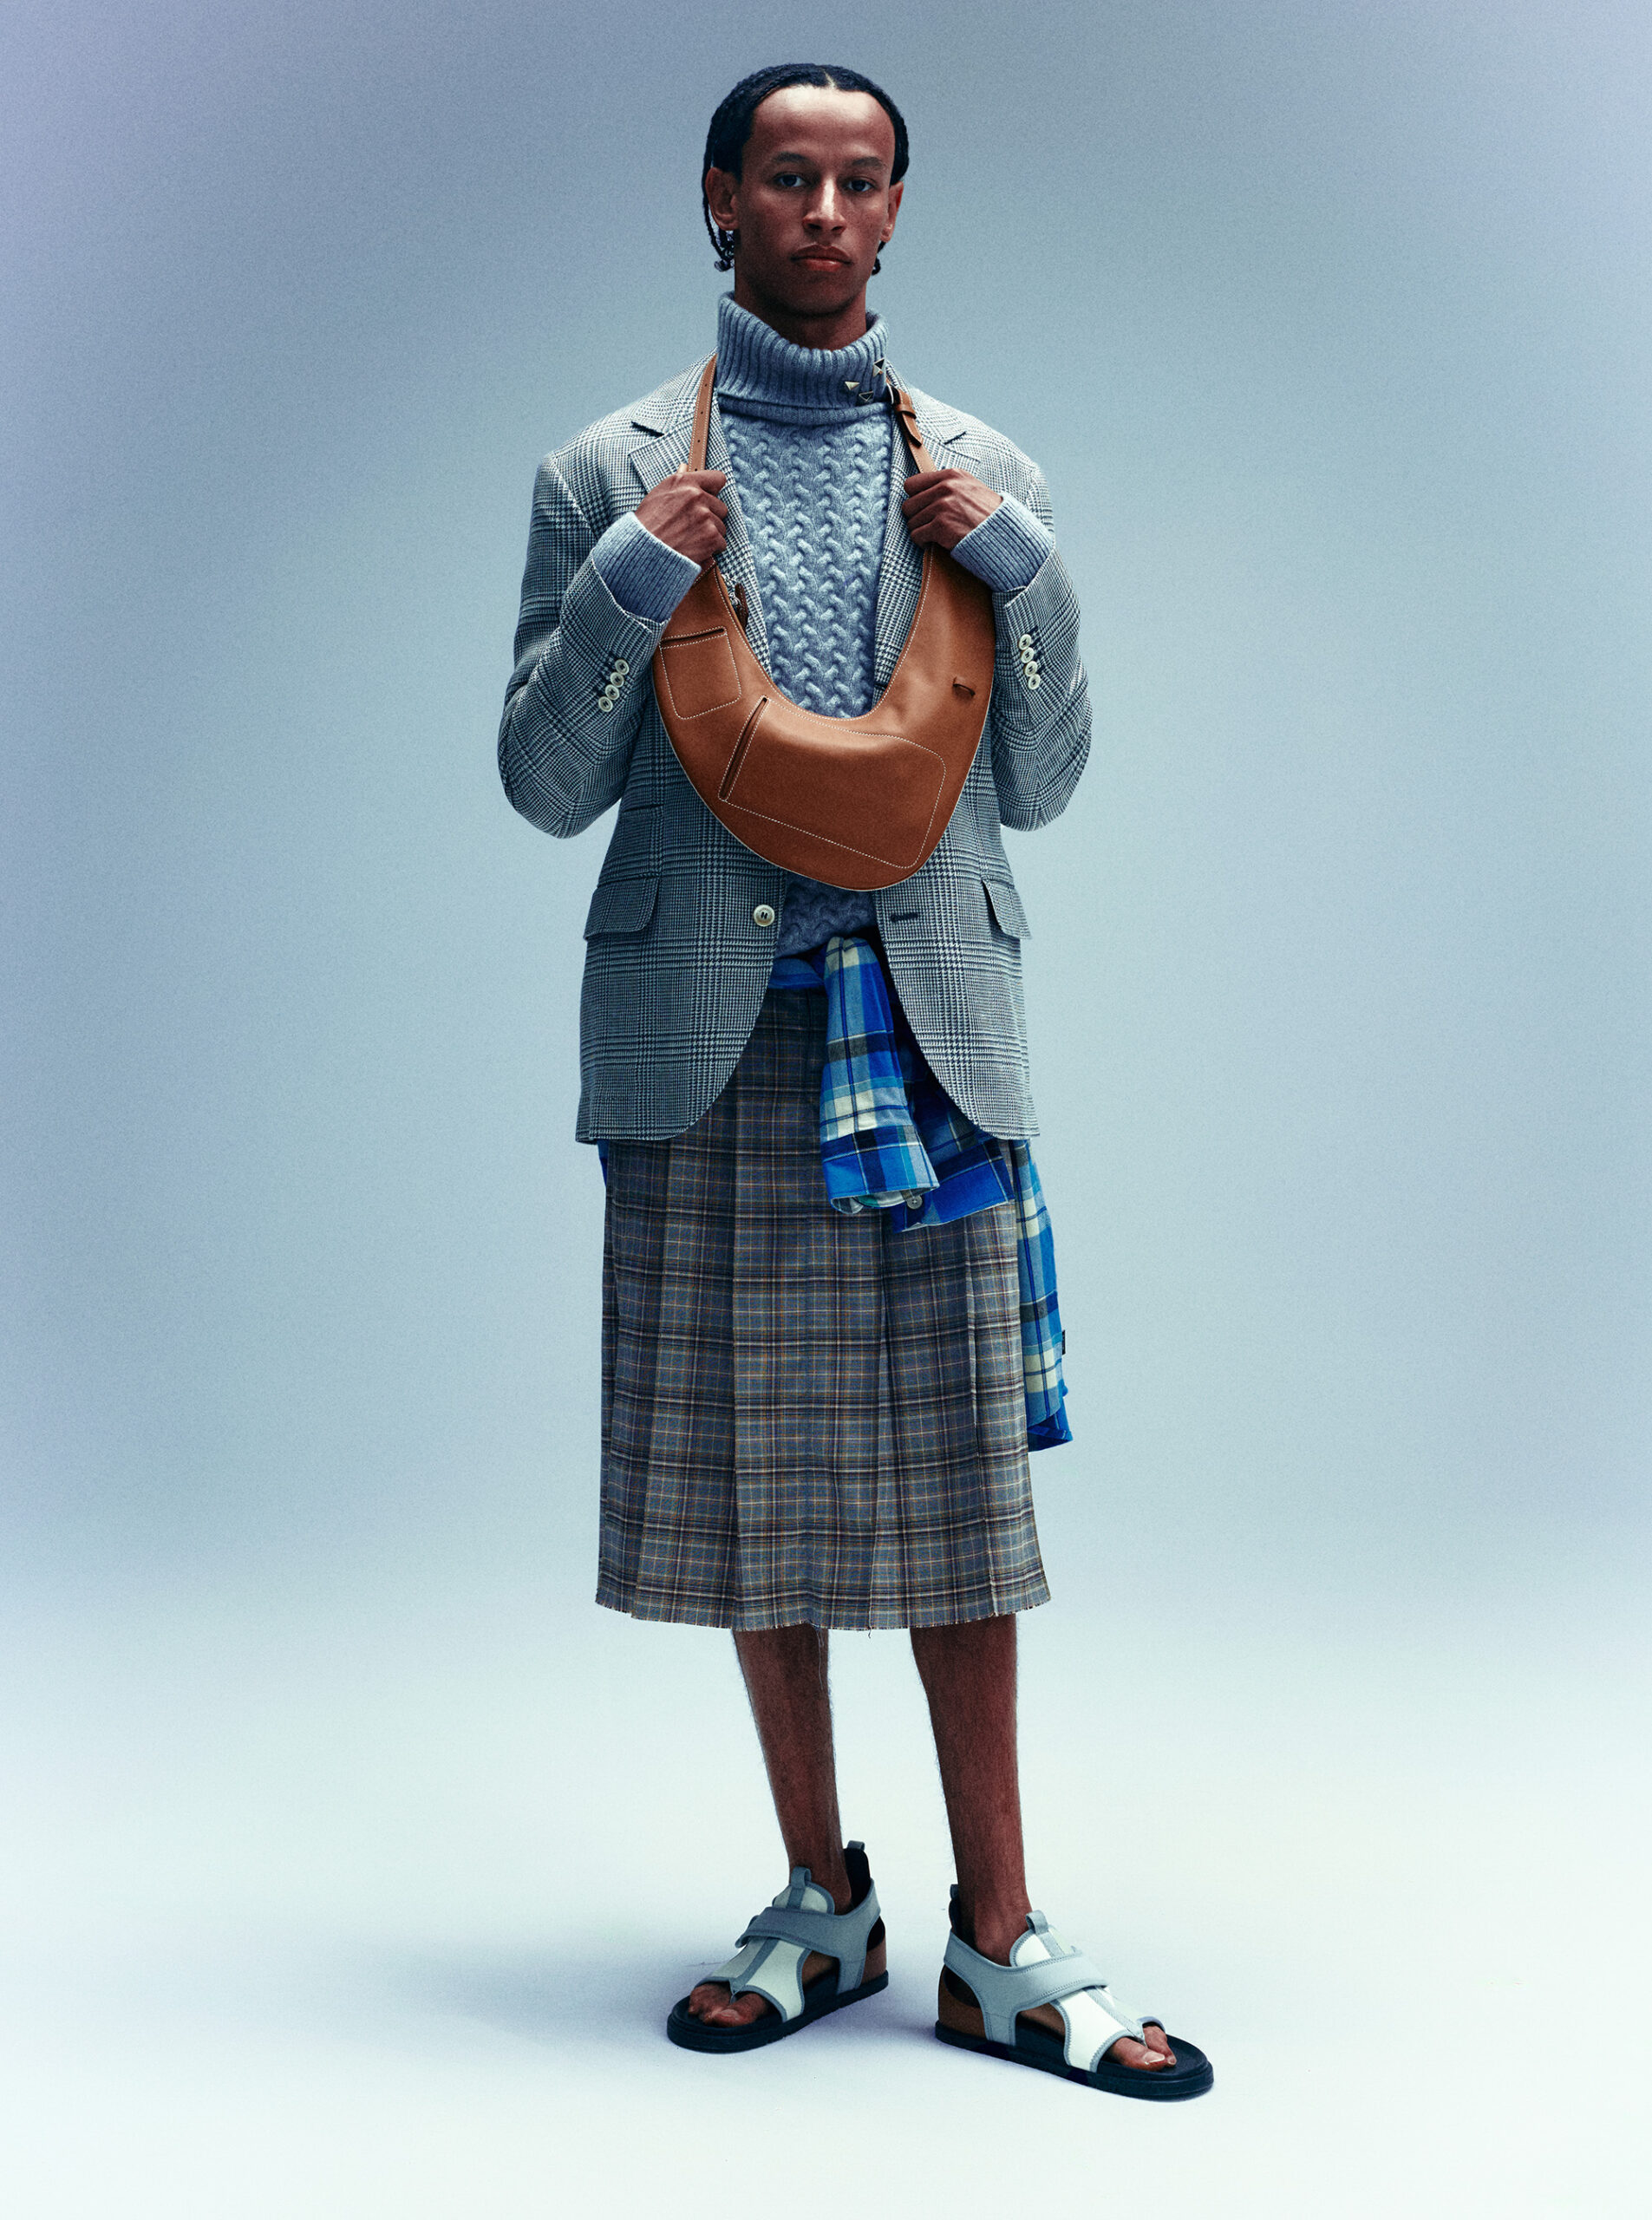 BLAZER ($4,995) AND TURTLENECK ($5,195) BY BRUNELLO CUCINELLI; BUTTON-UP SHIRT ($250) BY PAUL SMITH, AT SIMONS; SKIRT (PRICE UPON REQUEST) BY MRKNTN; BAG ($9,050) AND SHOES ($1,075) BY HERMÈS.